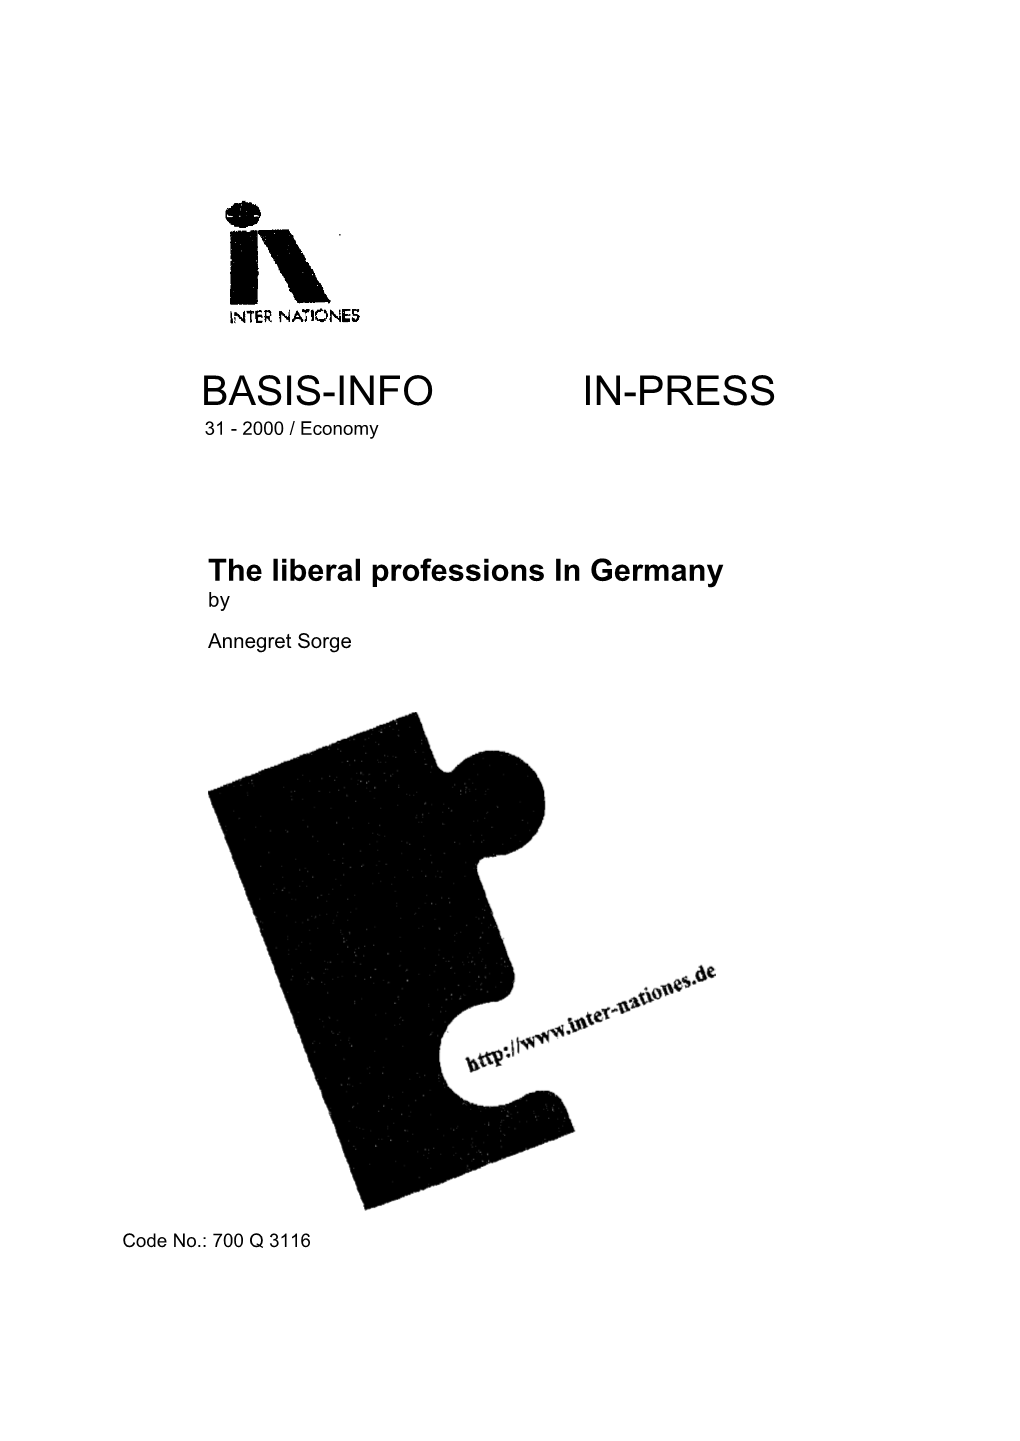 The Liberal Professions in Germany